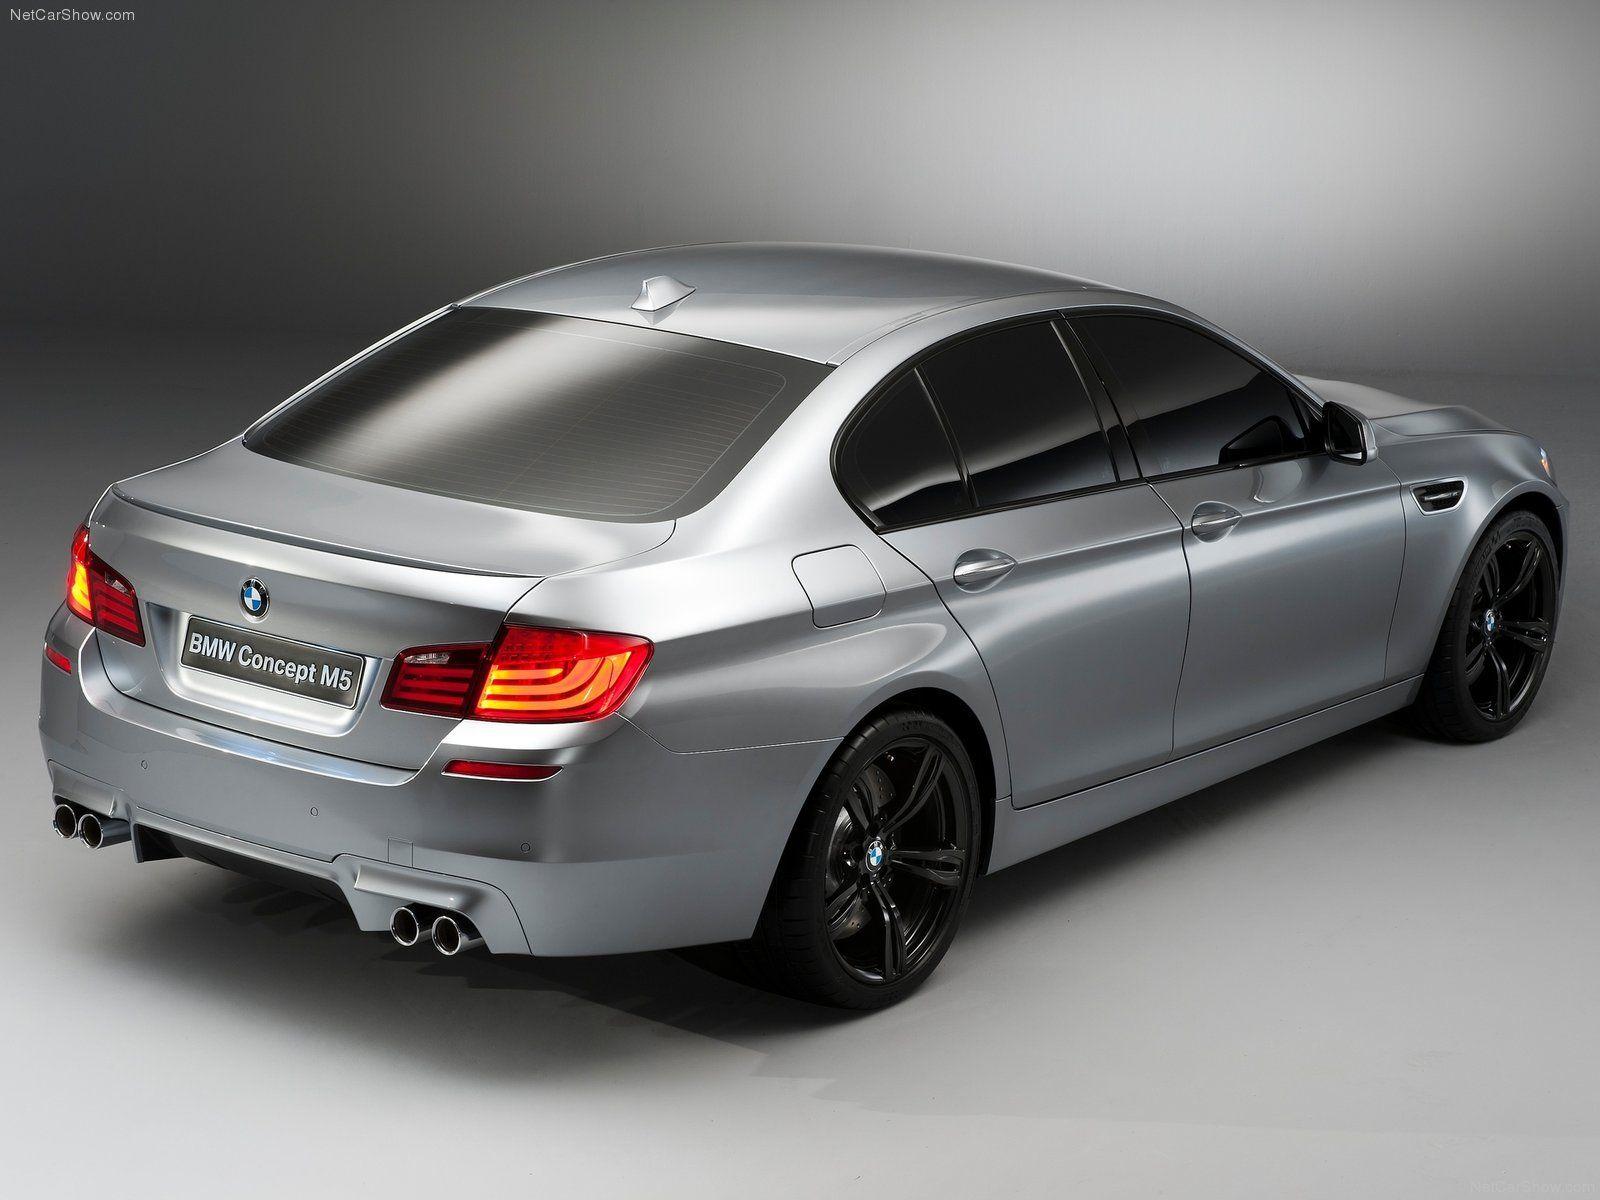 BMW M5 picture. BMW photo gallery